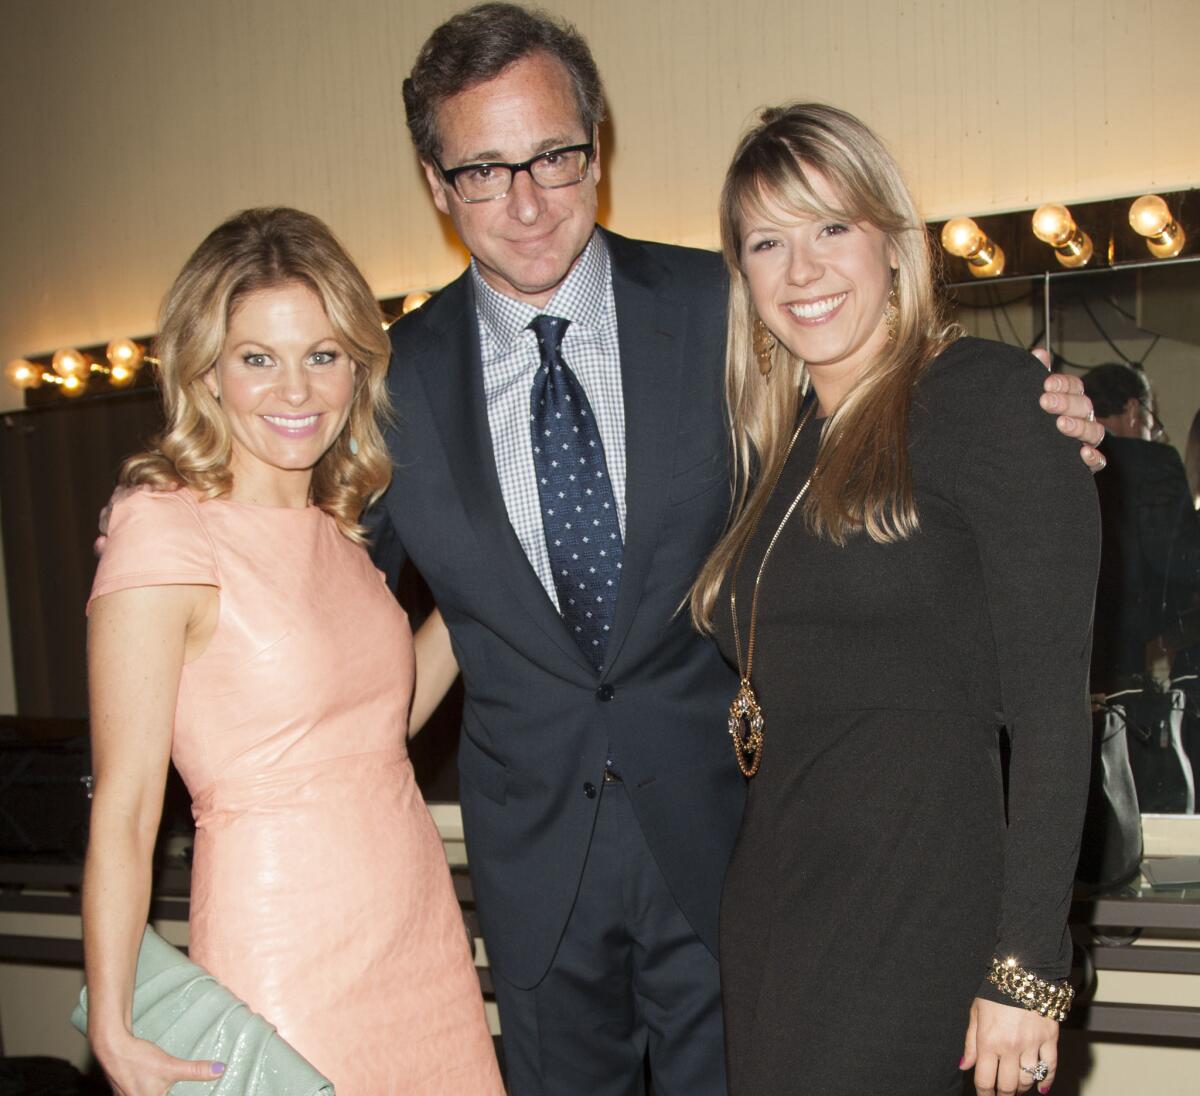 "Full House" stars Candace Cameron-Bure, Bob Saget and Jodie Sweetin attend the Scleroderma Research Foundation's Cool Comedy - Hot Cuisine charity event.